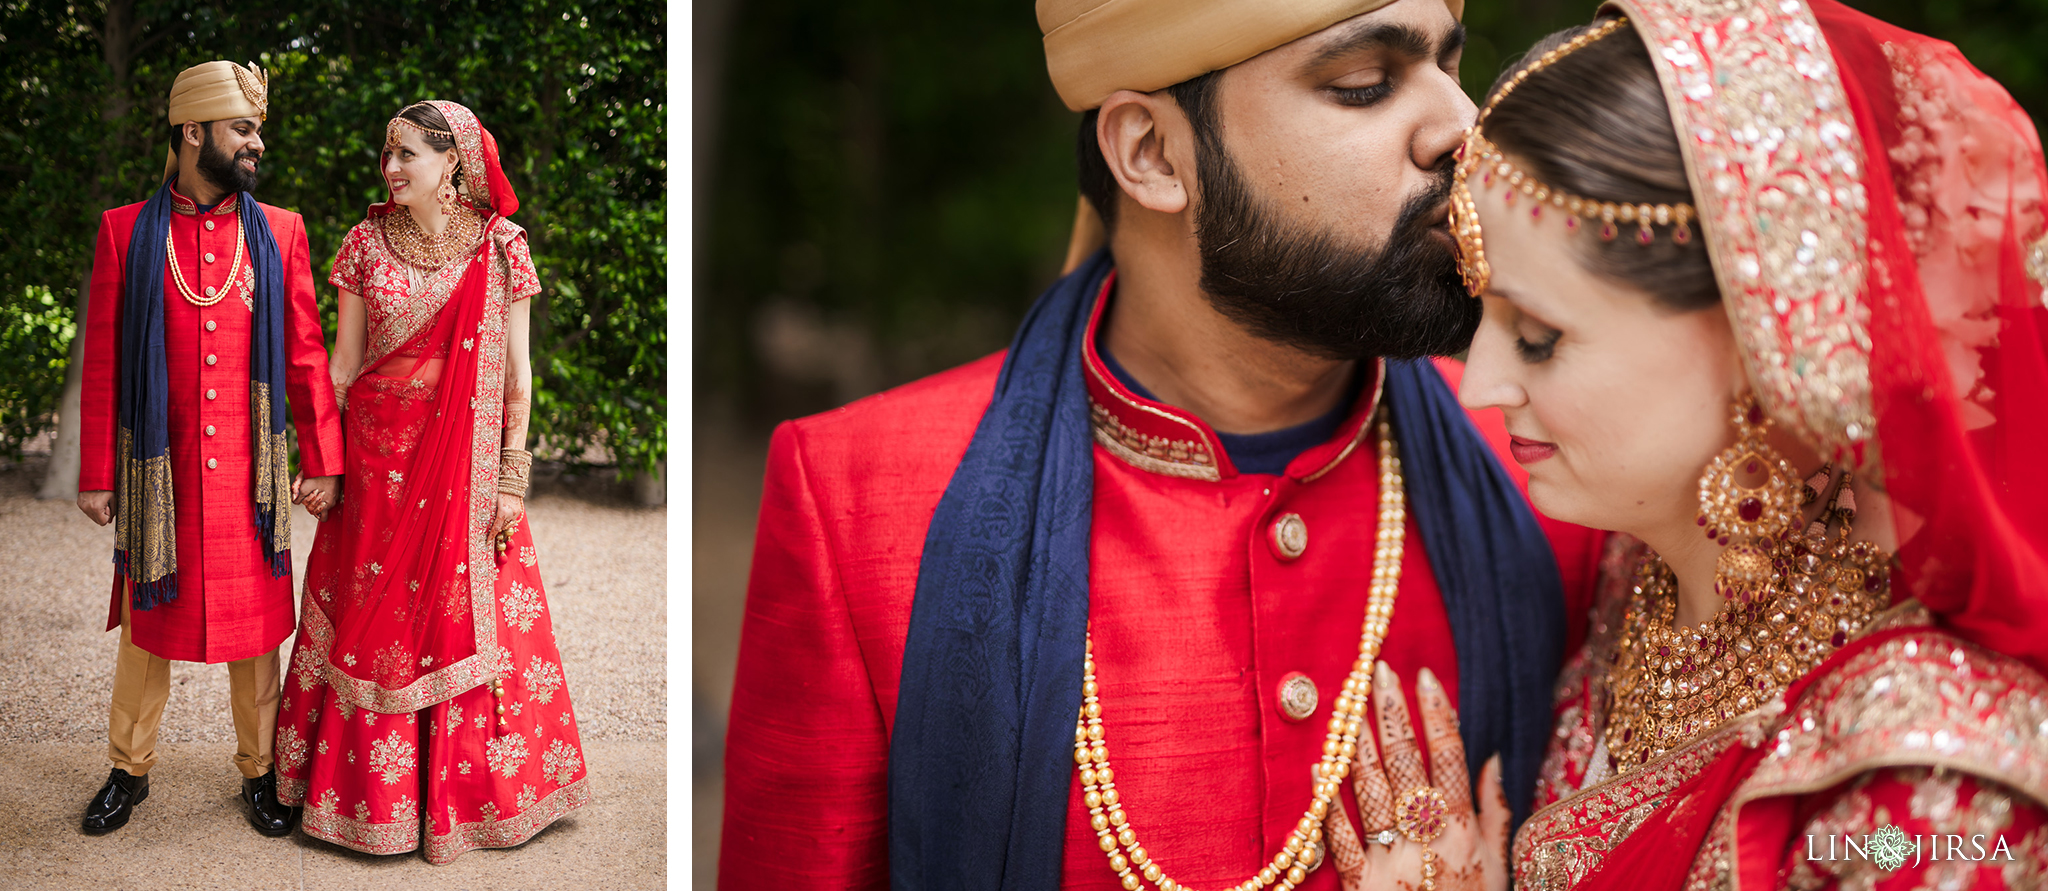 13 Hotel Irvine Multicultural Indian Wedding Photography